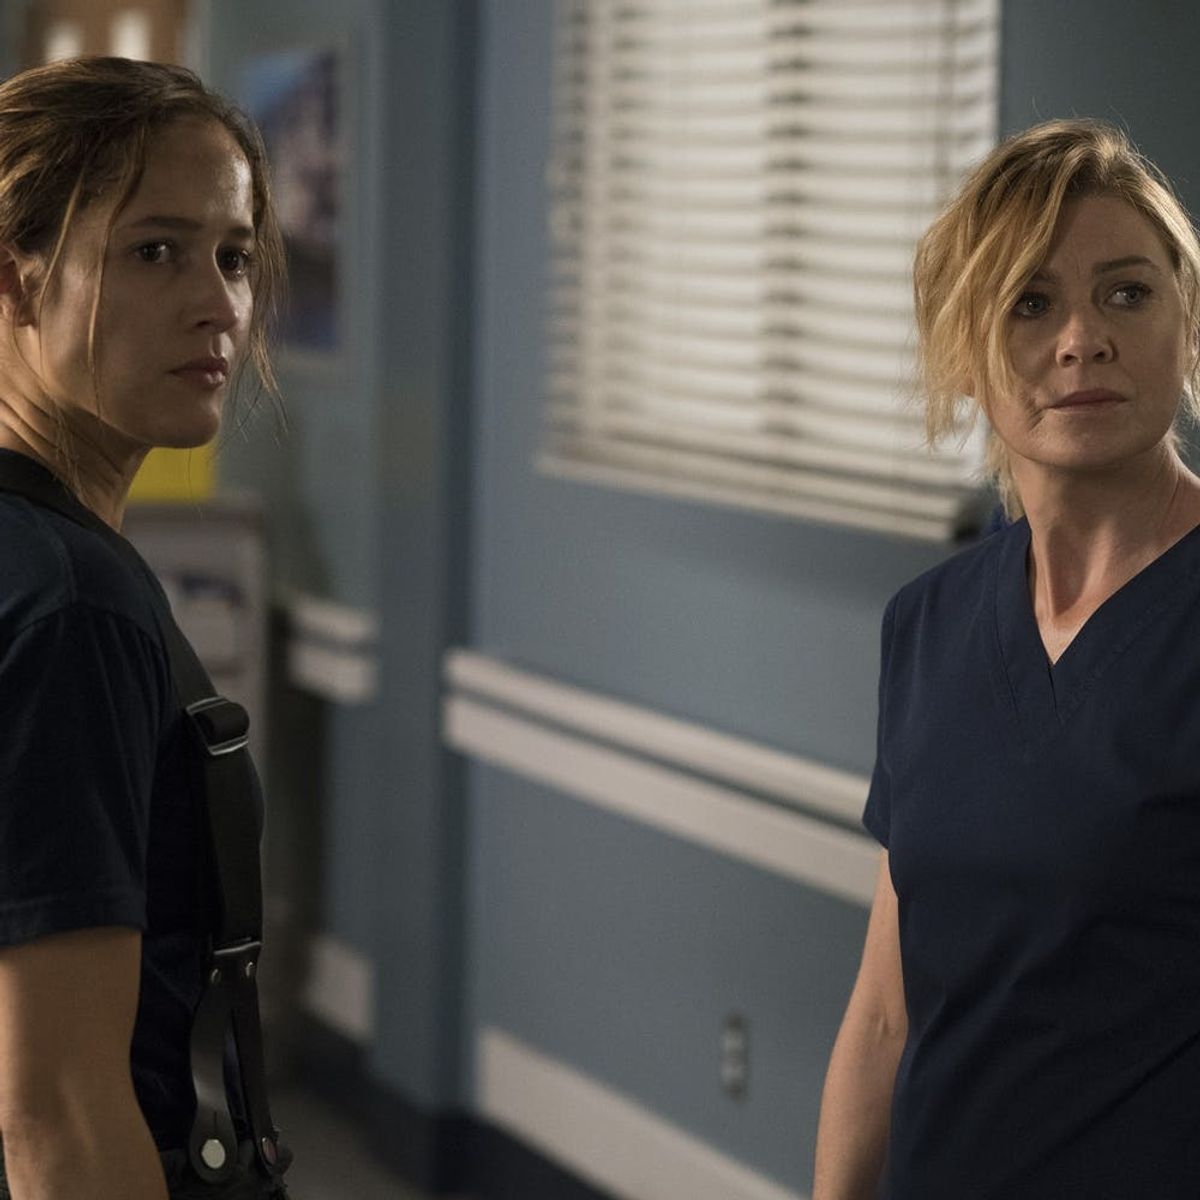 This Trailer for the ‘Grey’s Anatomy’ and ‘Station 19’ Crossover Episode Will Get Your Heart Racing